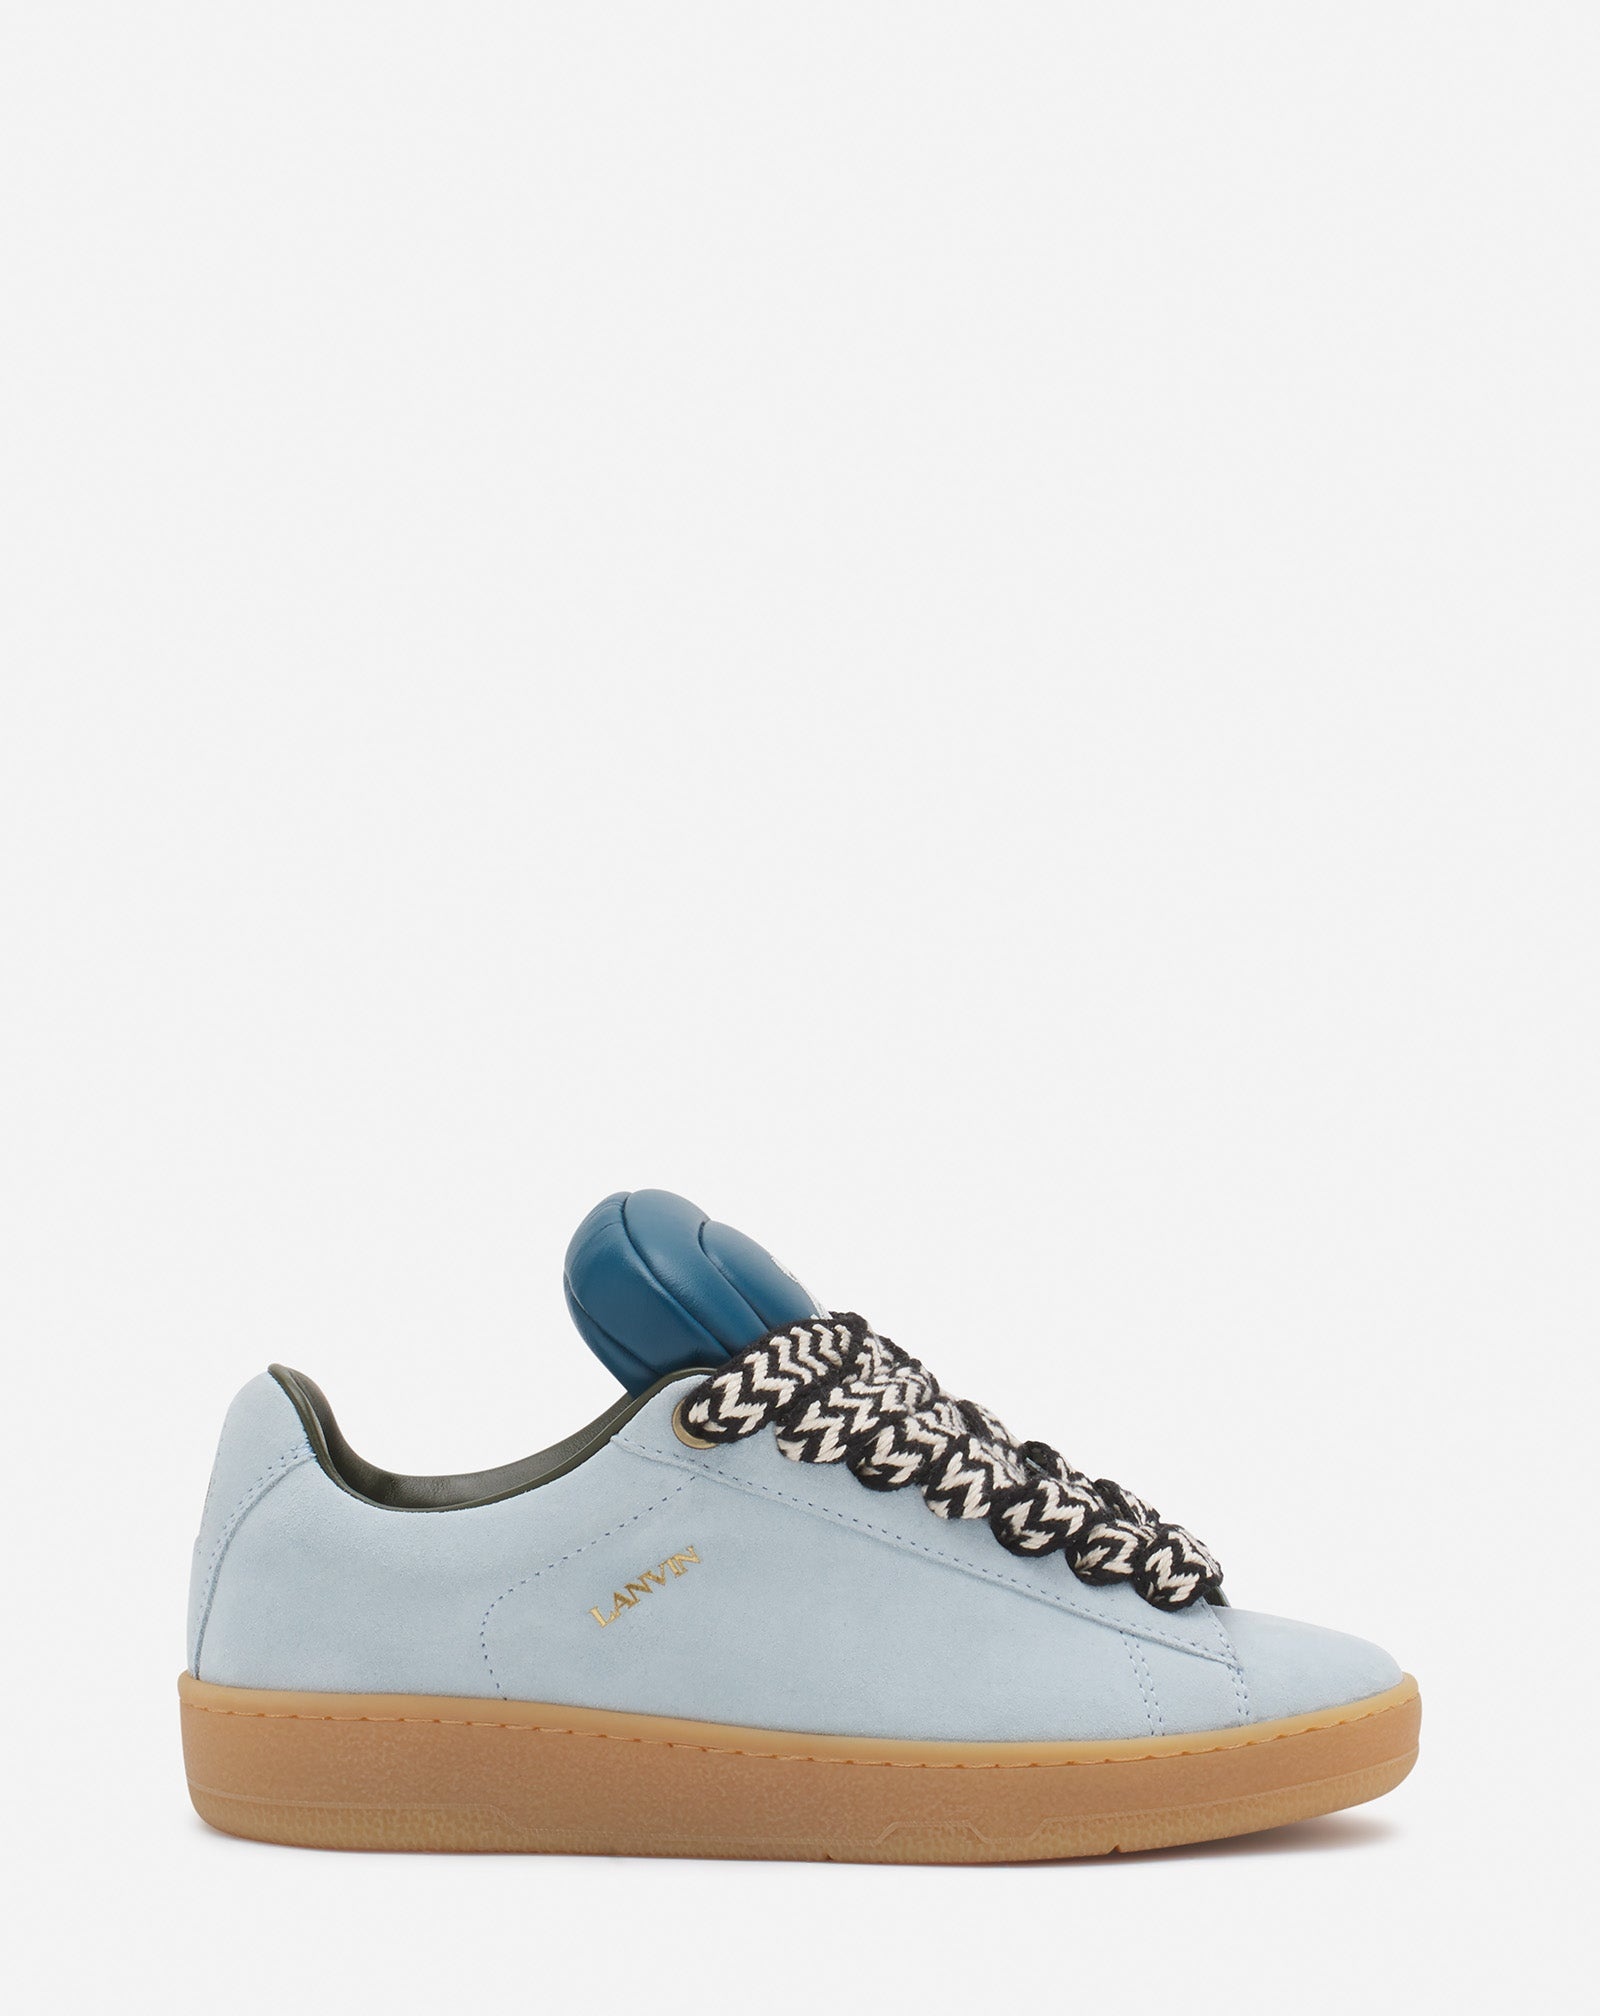 LANVIN X FUTURE HYPER CURB SNEAKERS IN LEATHER AND SUEDE FOR WOMEN - 1